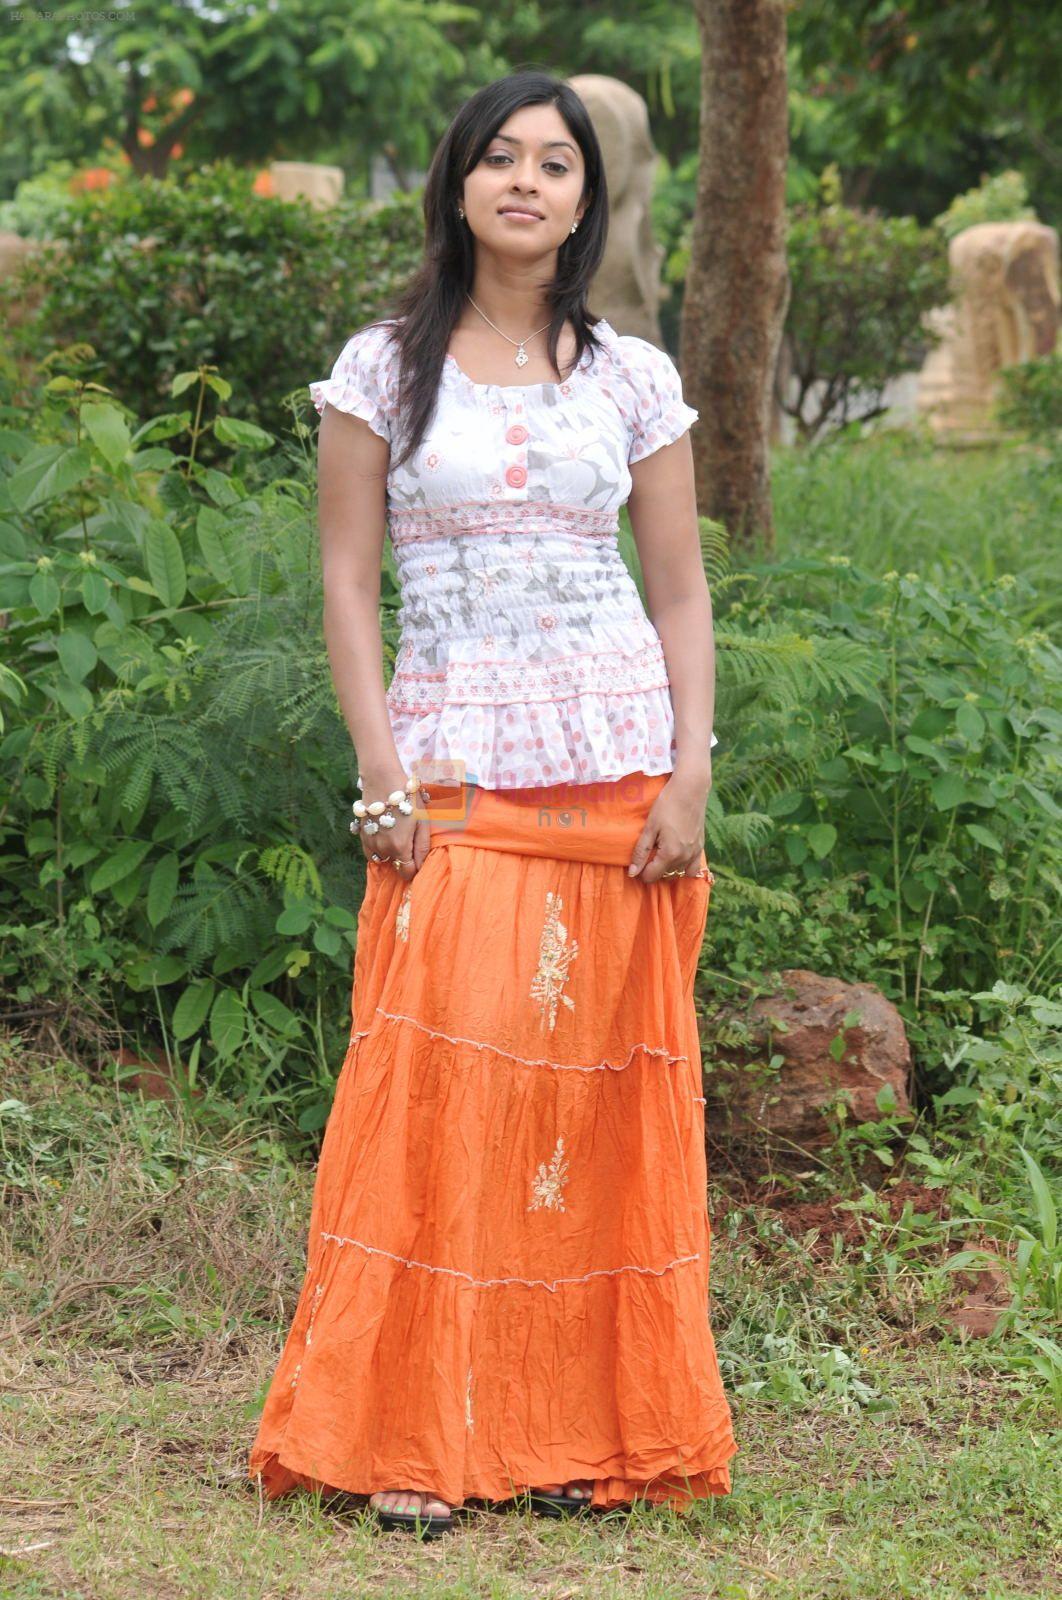 Payal Ghosh in a casual shoot on July  23, 2010